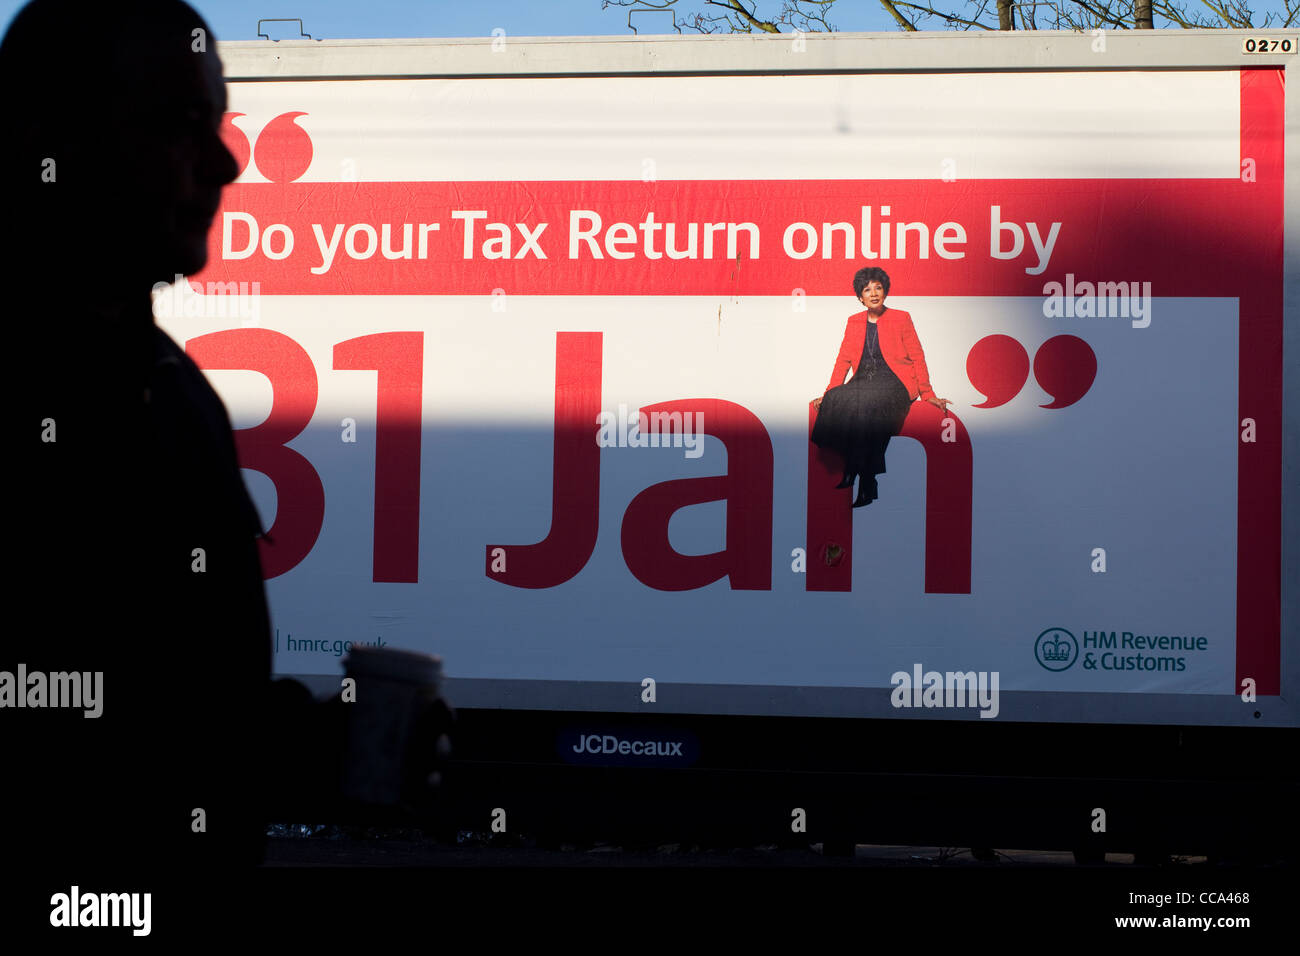 do your Tax return online by 31 Jan poster billboard HM Revenue and customs Stock Photo